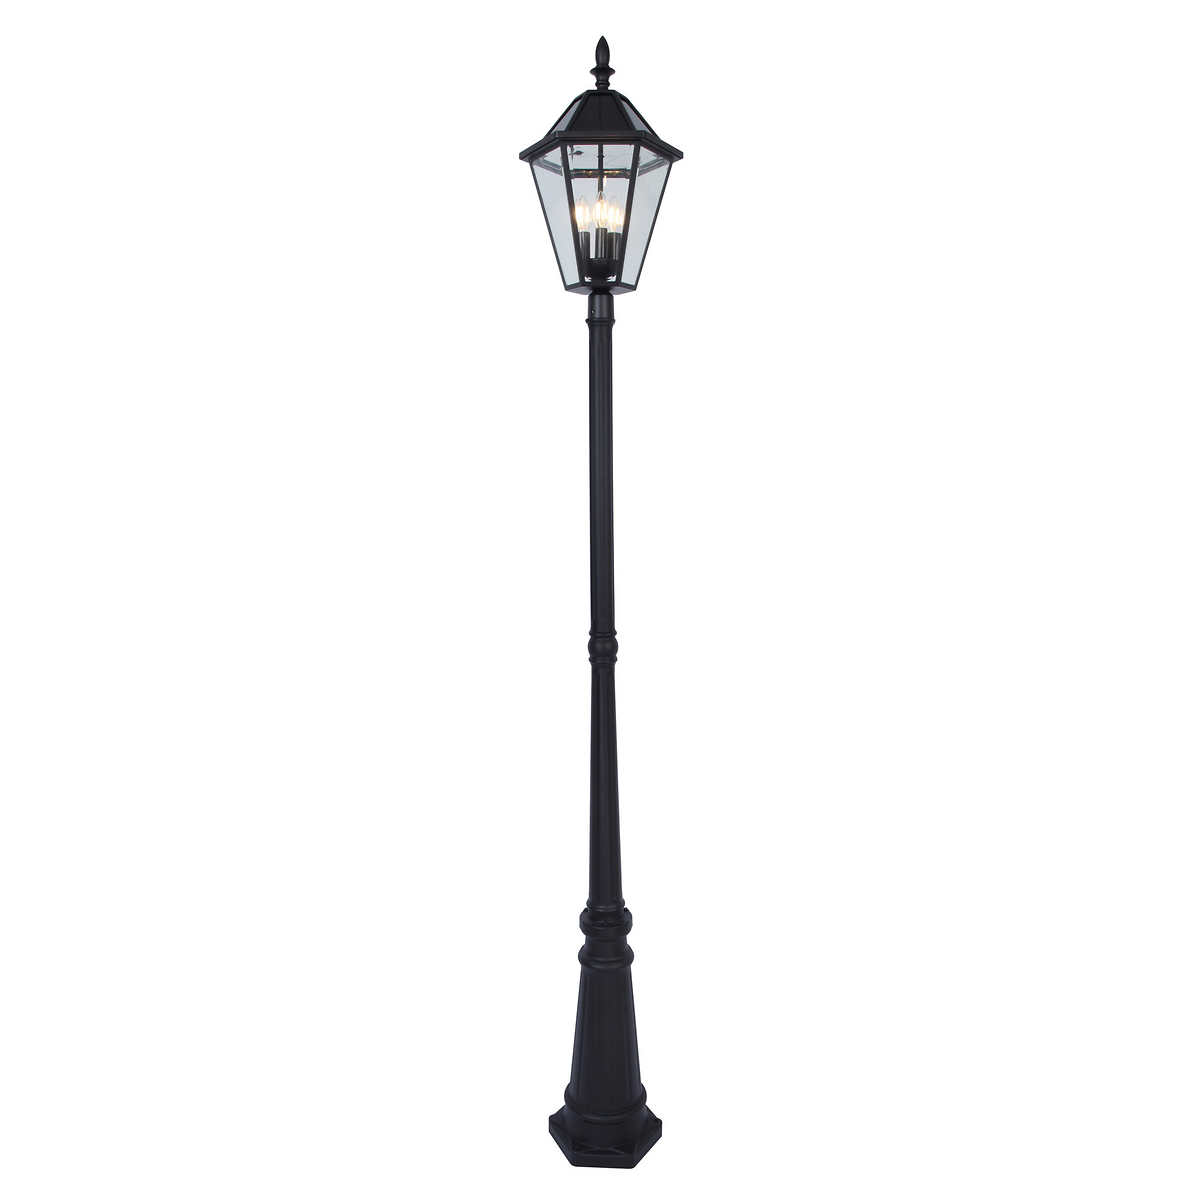 Lutec Outdoor Led Solar Post Light Costco, Lamp Post Fixture Replacement